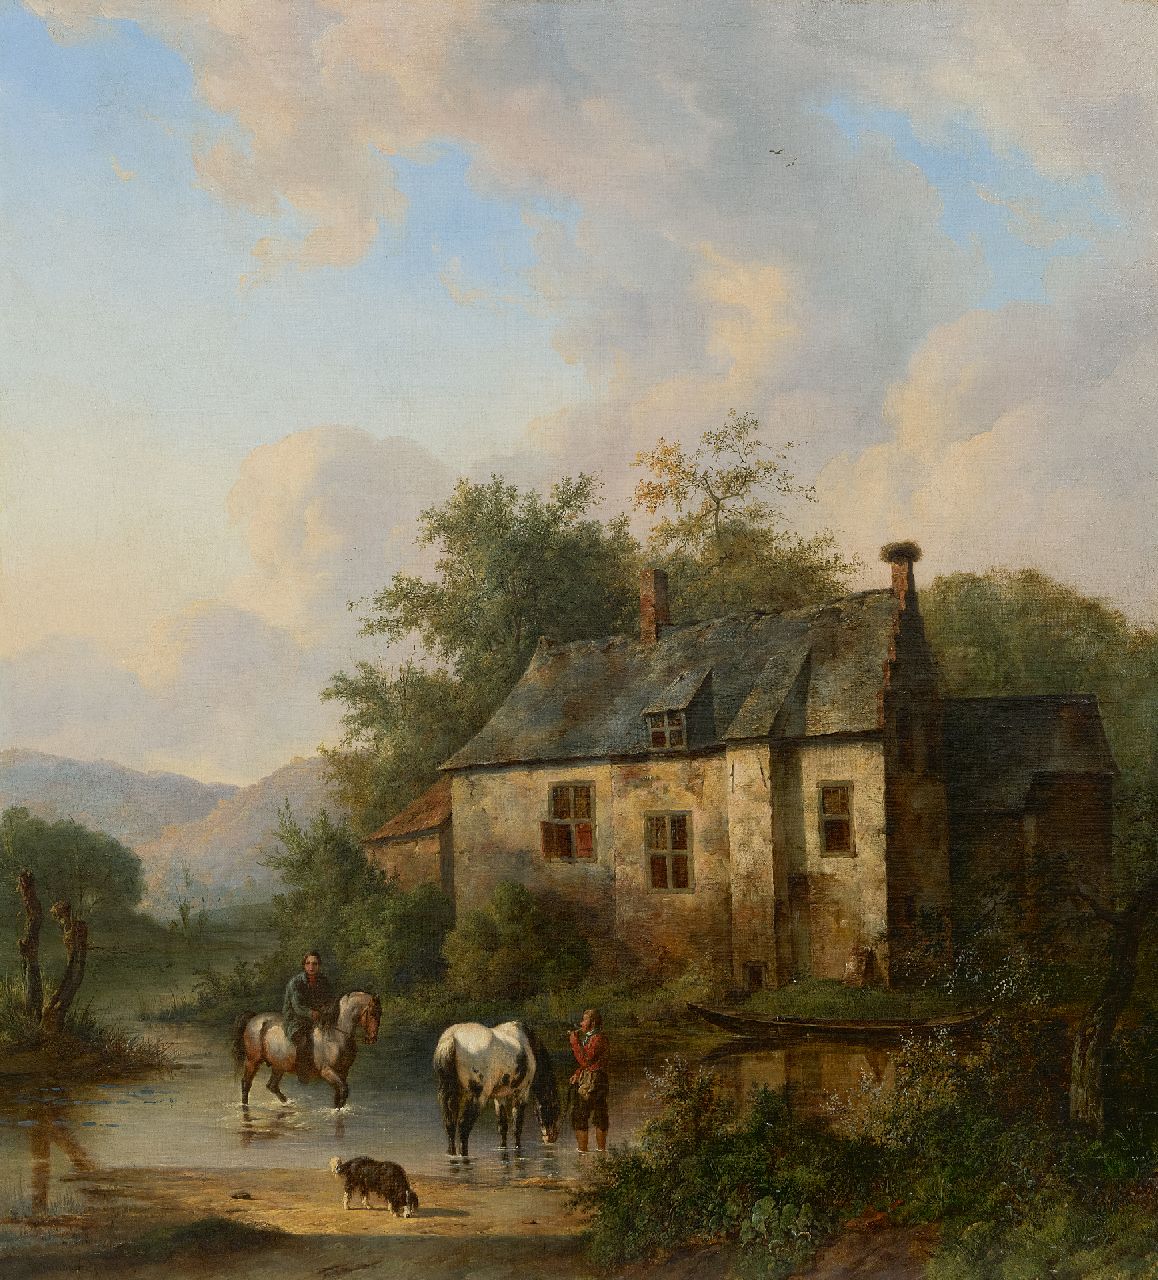 Verschuur W.  | Wouterus Verschuur | Paintings offered for sale | Equestrians and drinking horses near 'Huis te Boxtel', oil on canvas 70.5 x 63.7 cm, signed l.l